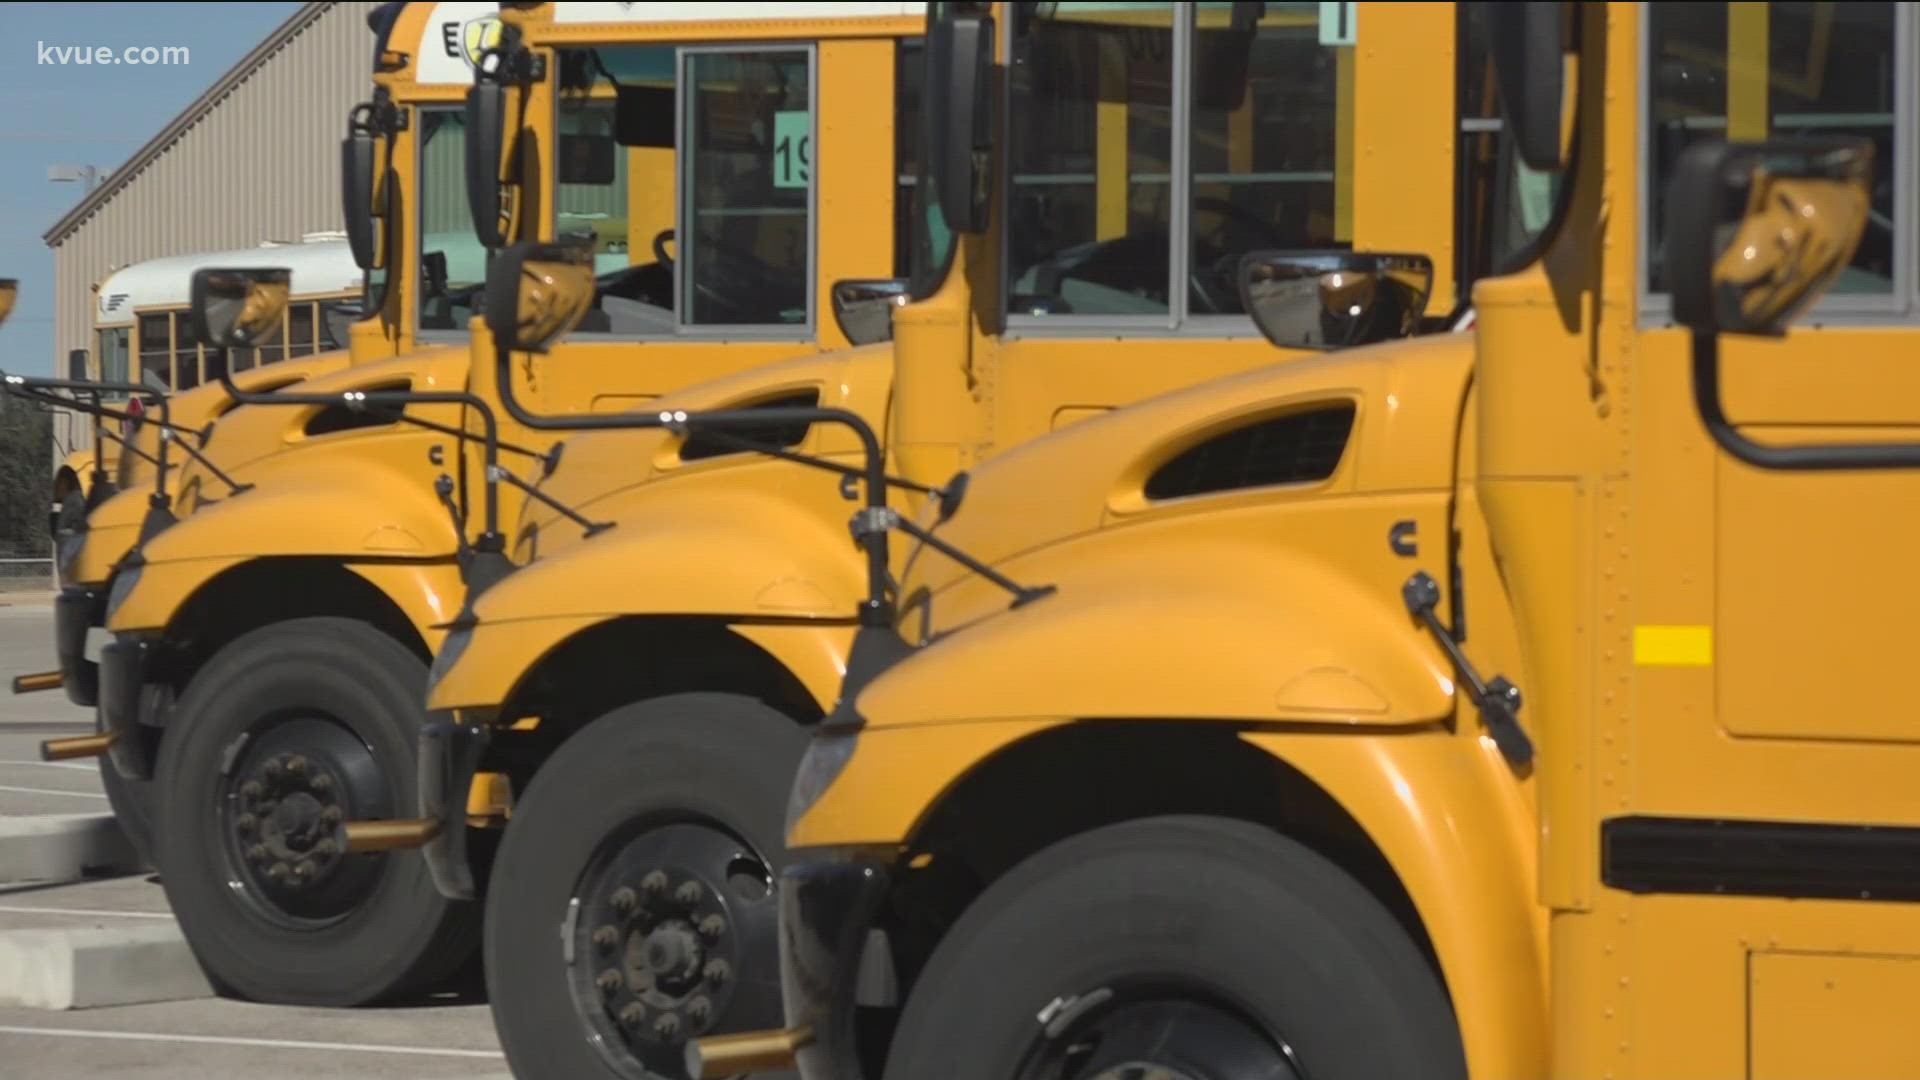 Lake Travis ISD said it has been searching for anyone with a bus license to fill in while drivers are out due to infections.